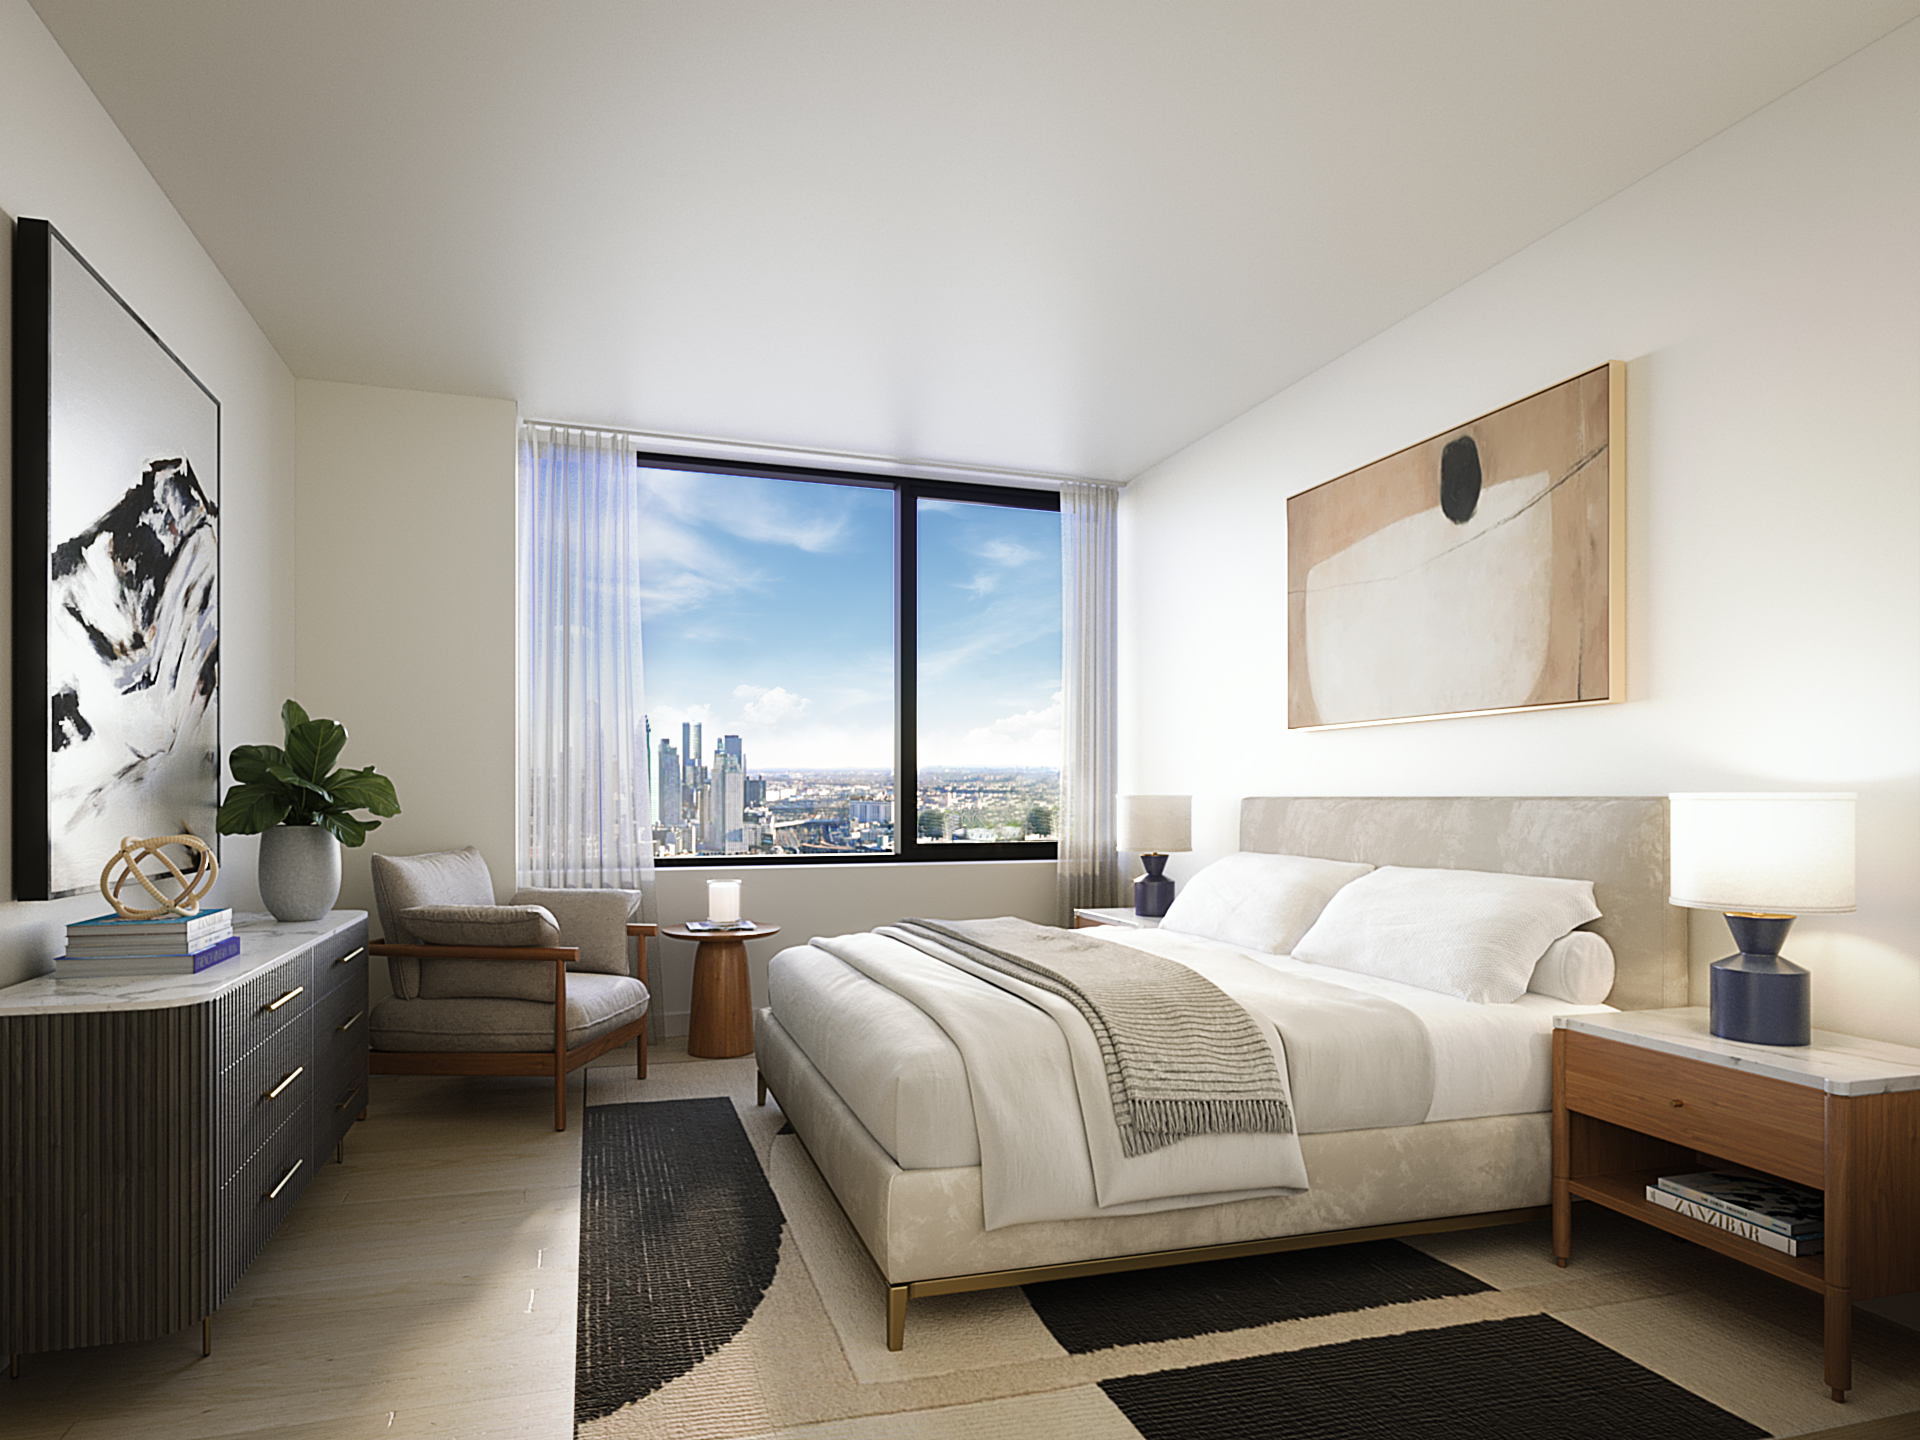 1682366180-10-77_Commercial-Bedroom-R04